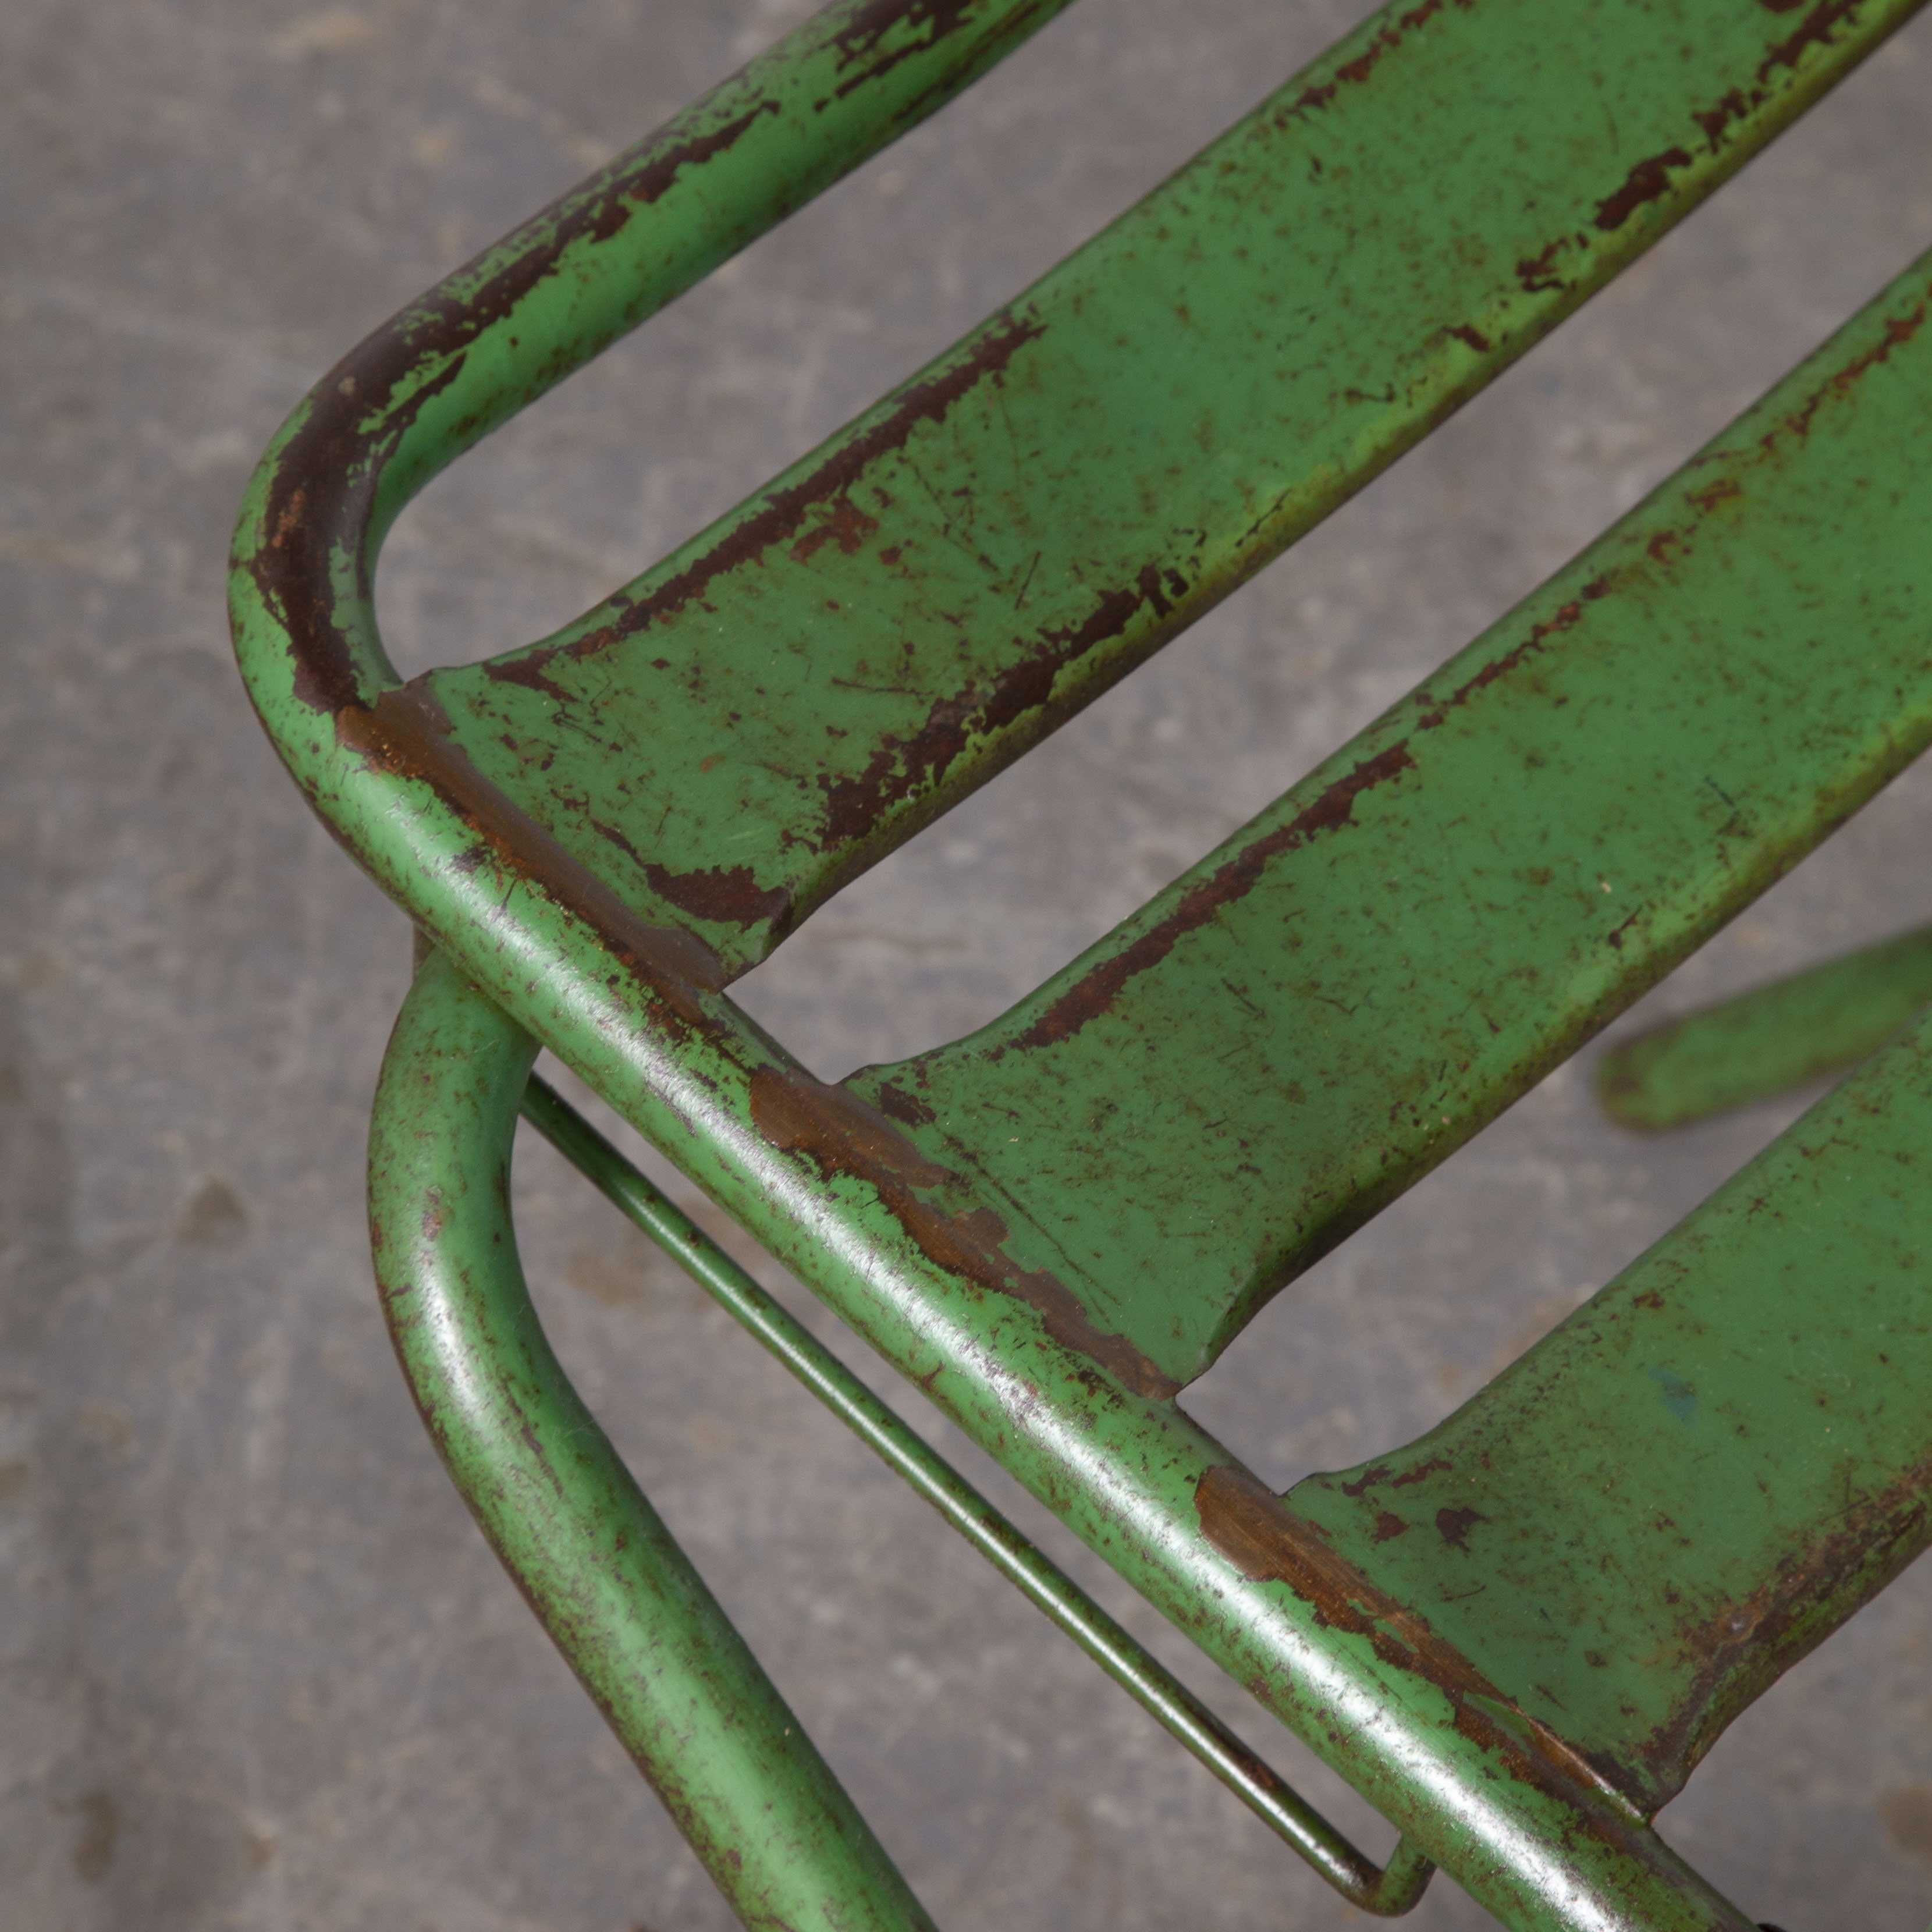 1960s French green metal folding chairs – set of six

1960s French green slatted metal folding chairs – set of six. Very good quality French folding chairs from the 1960’s, we don’t know the history or the maker but they are heavy and solid with